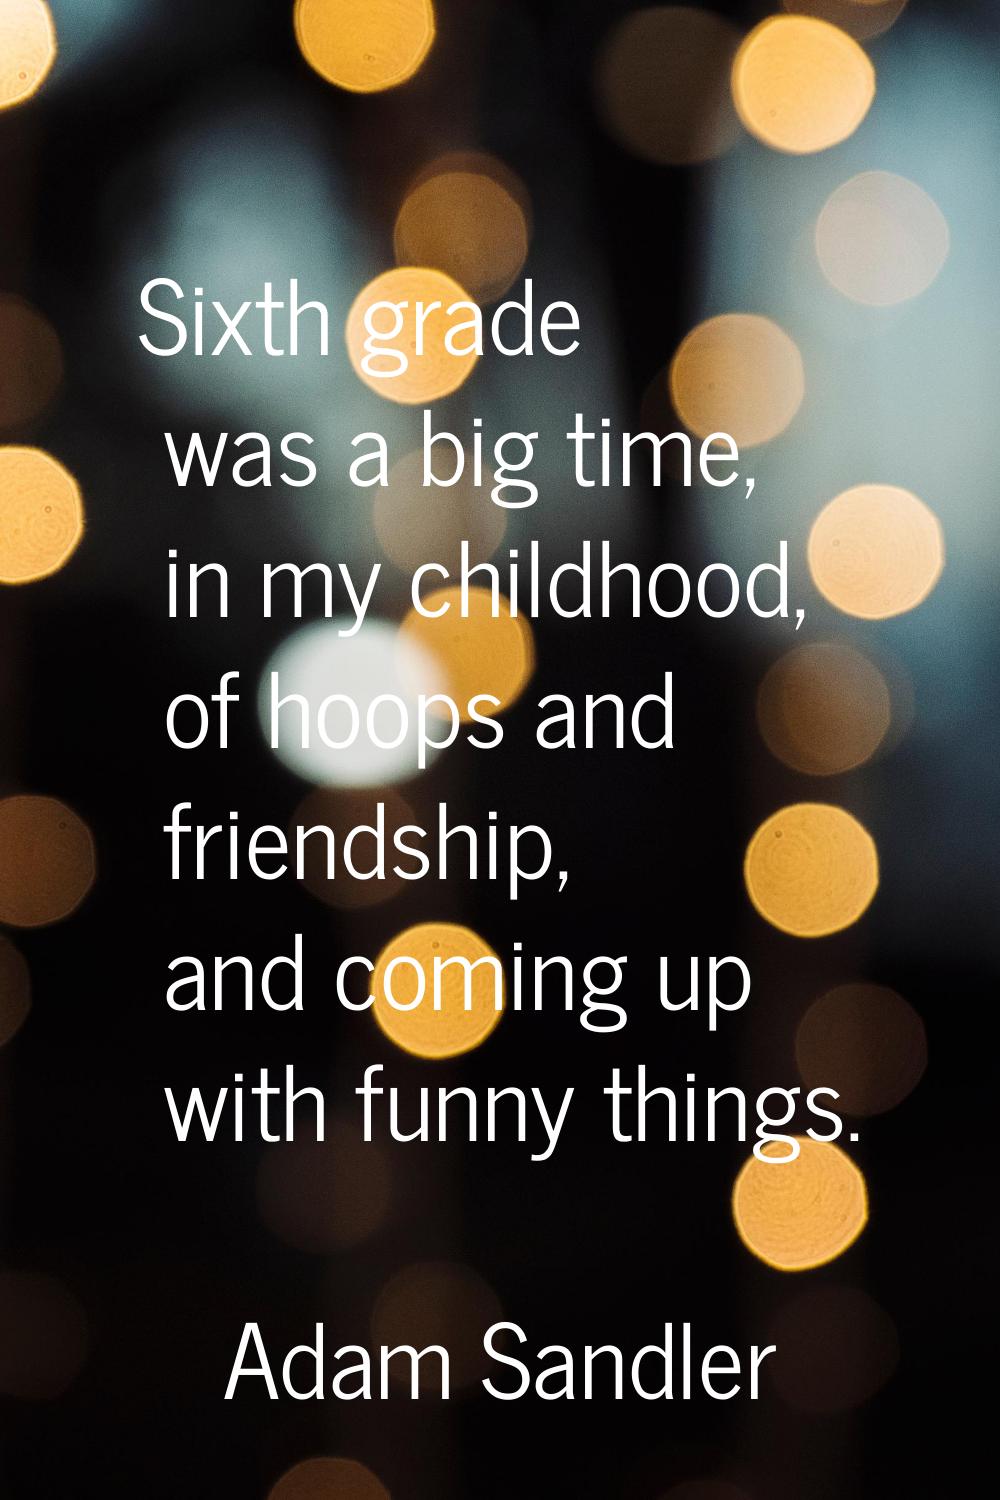 Sixth grade was a big time, in my childhood, of hoops and friendship, and coming up with funny thin